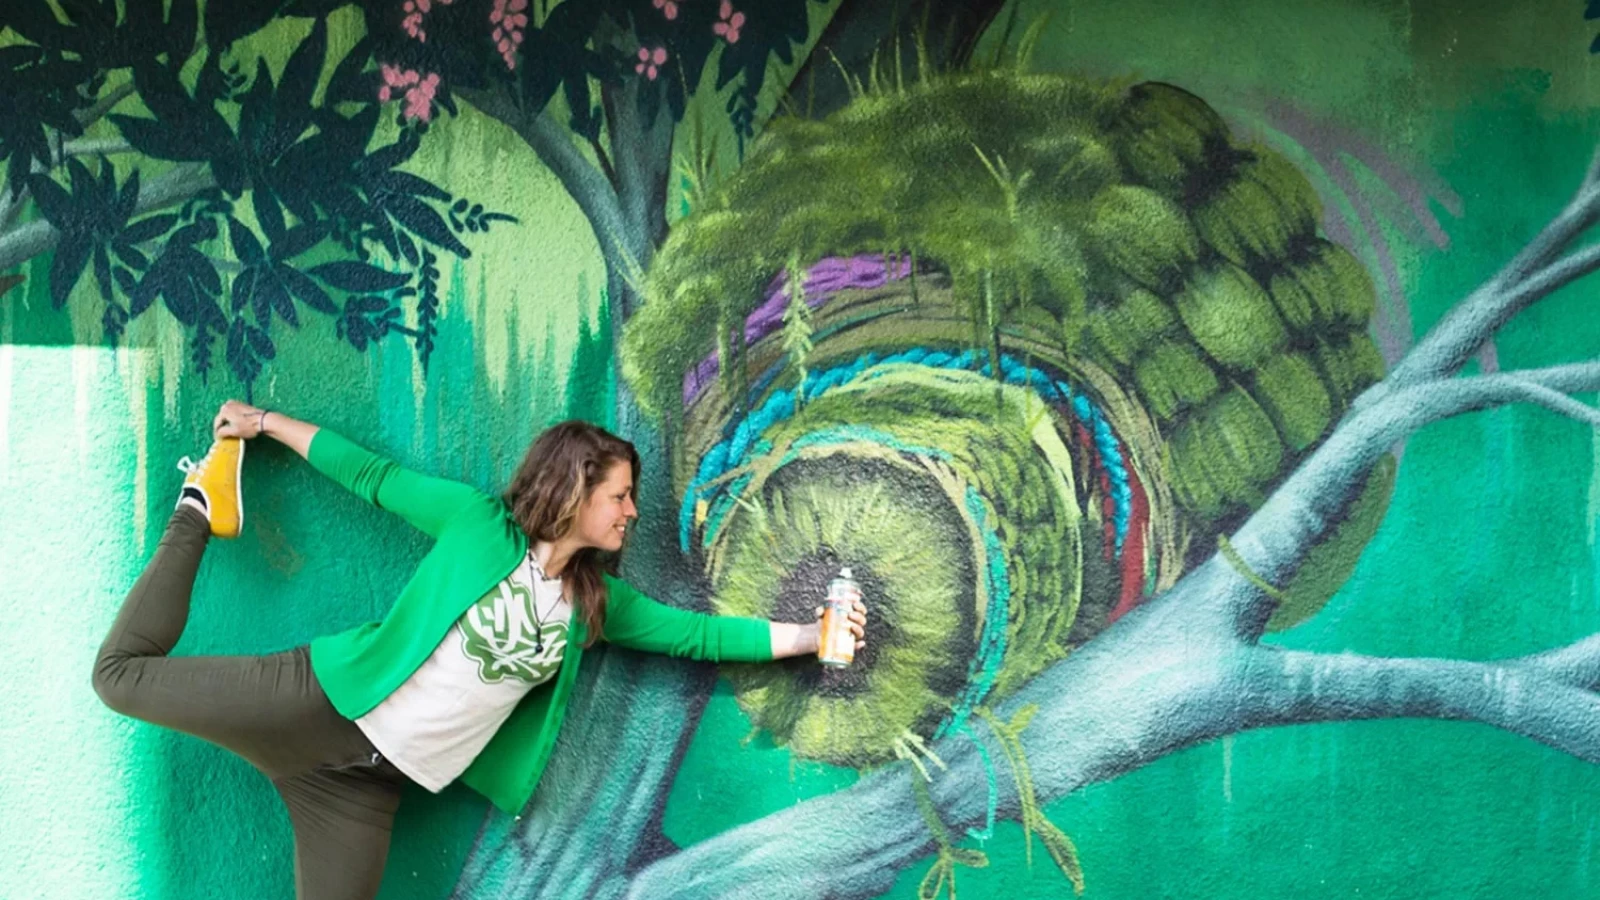 Faunagraphic aka Sarah Yates stands on one leg in front of a mural she painted.